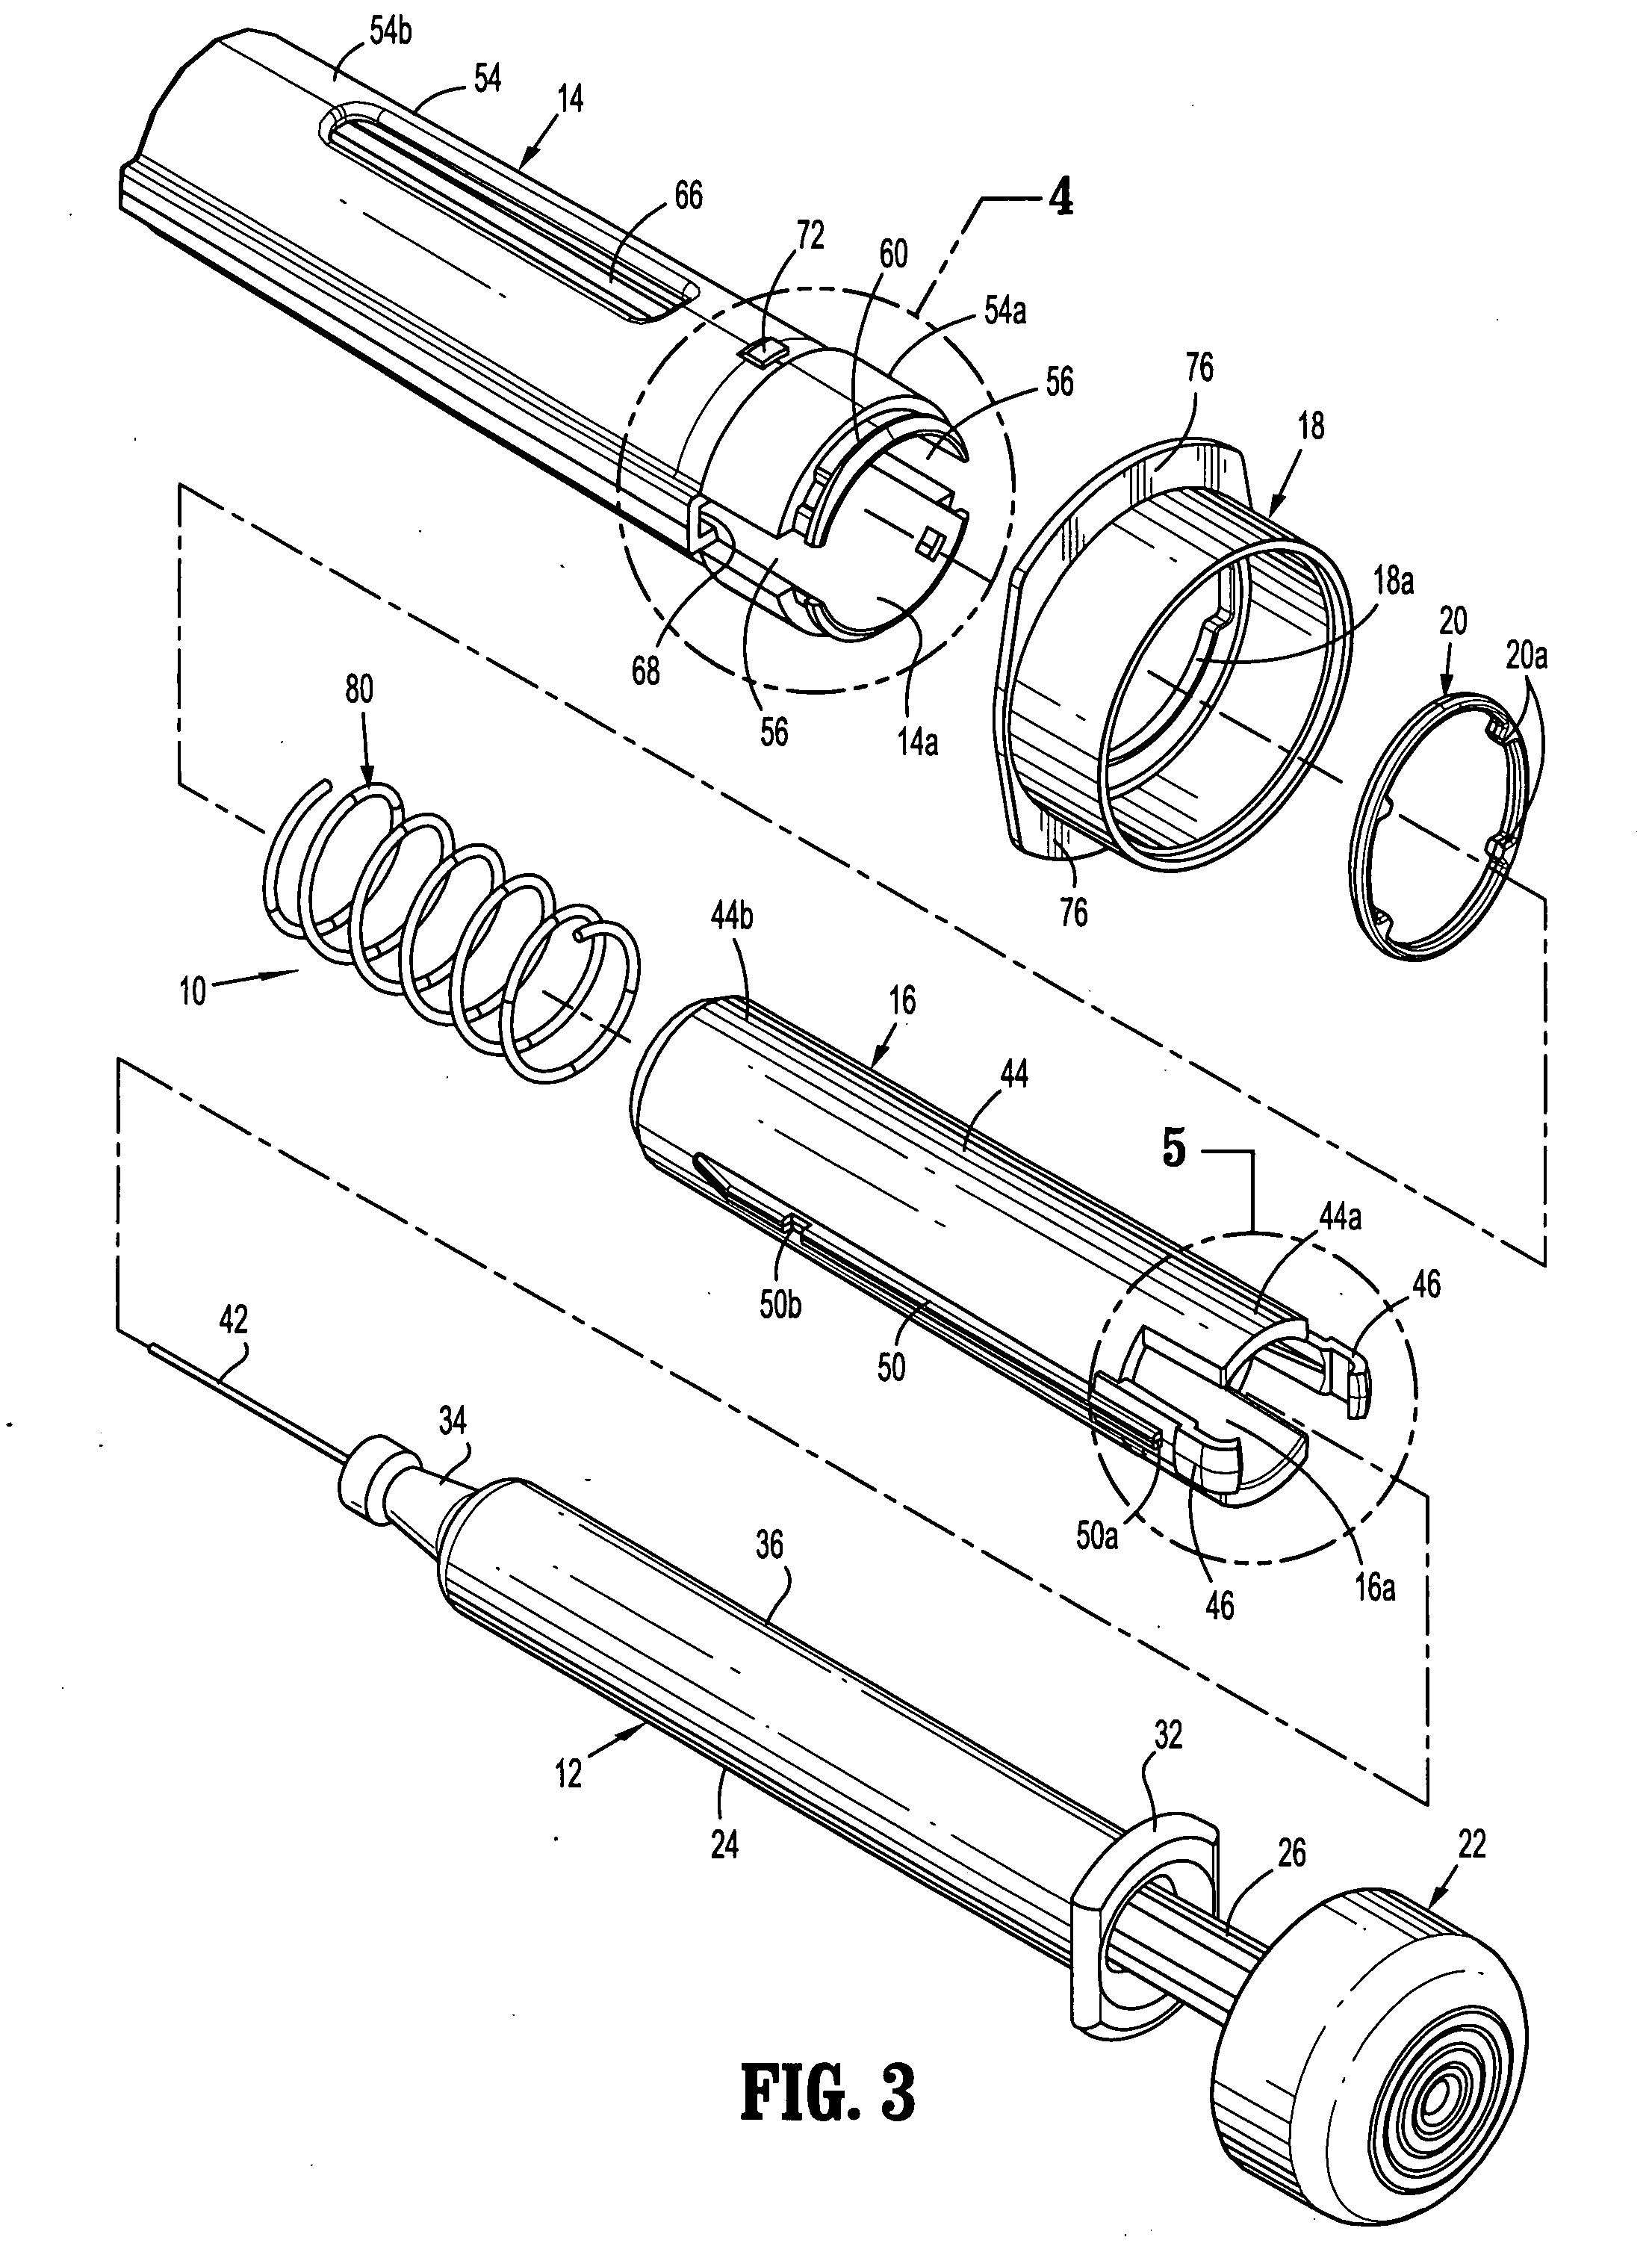 Passive latch ring safety shield for injection devices